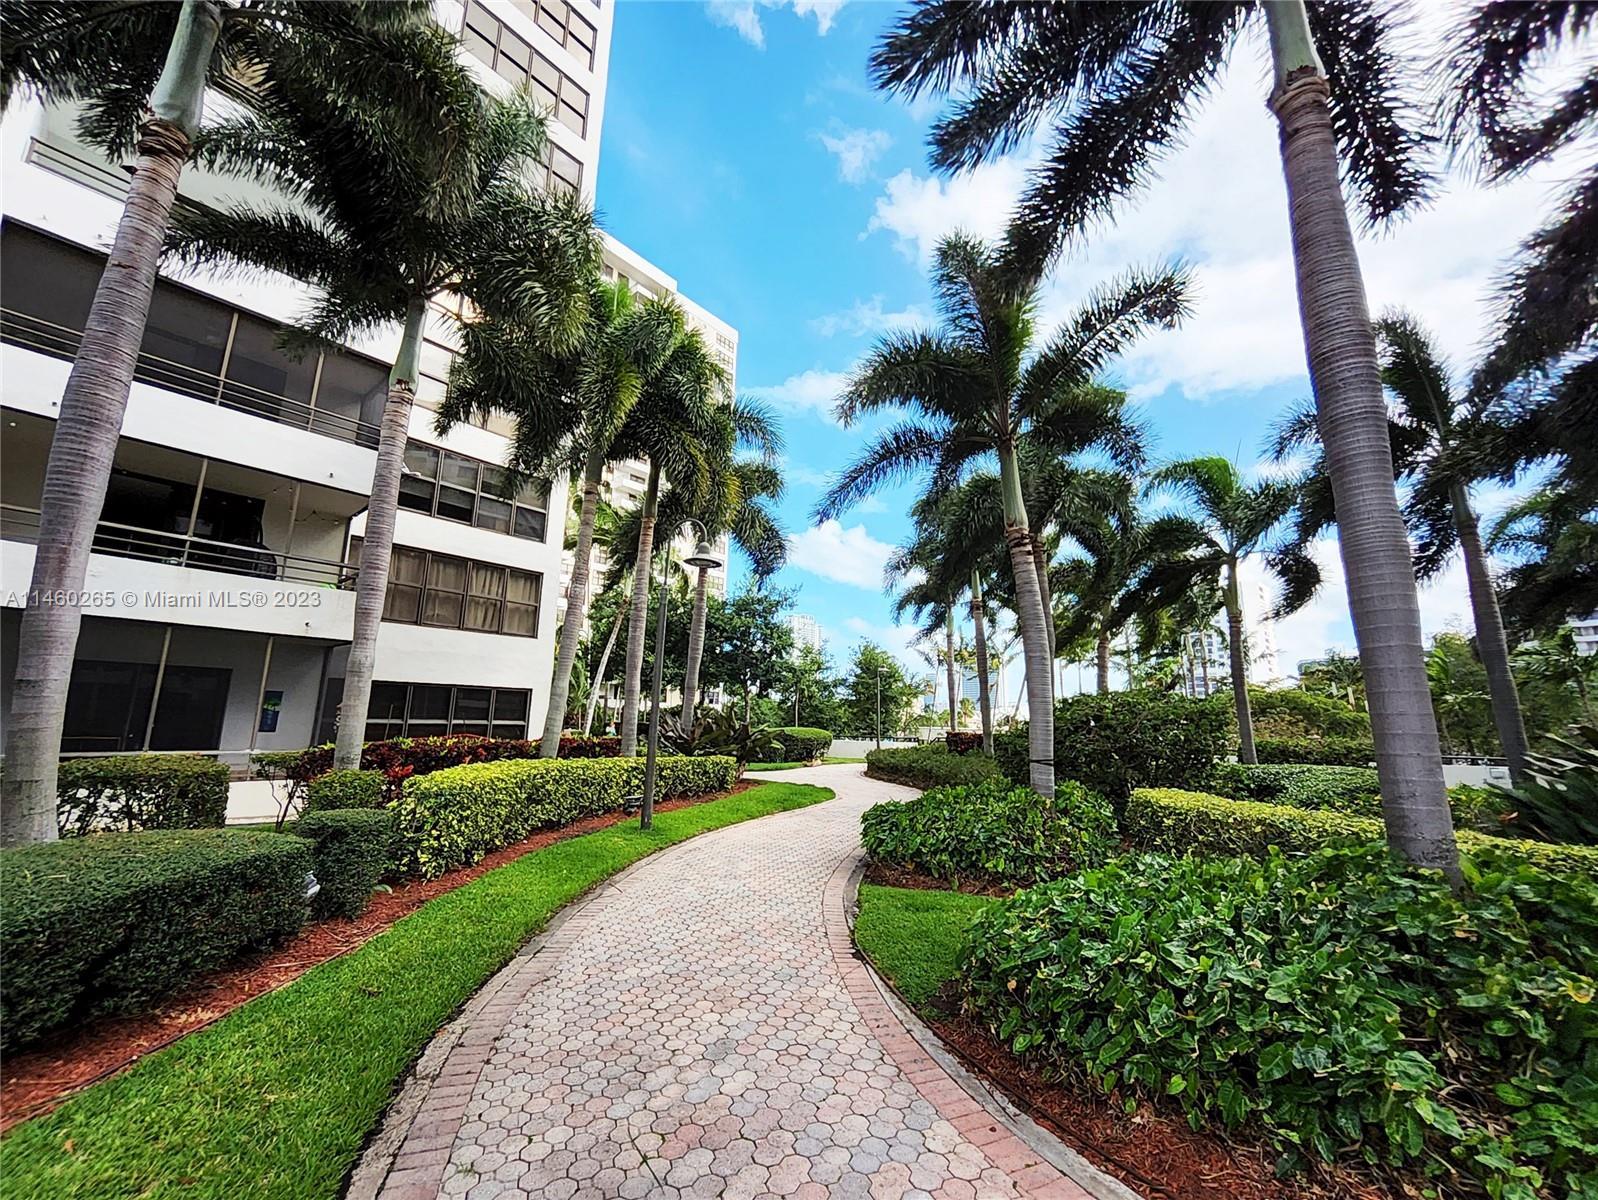 LOCATION! LOCATION! Welcome to this amazing resort style living at the MOST DESIRABLE Olympus Condo 